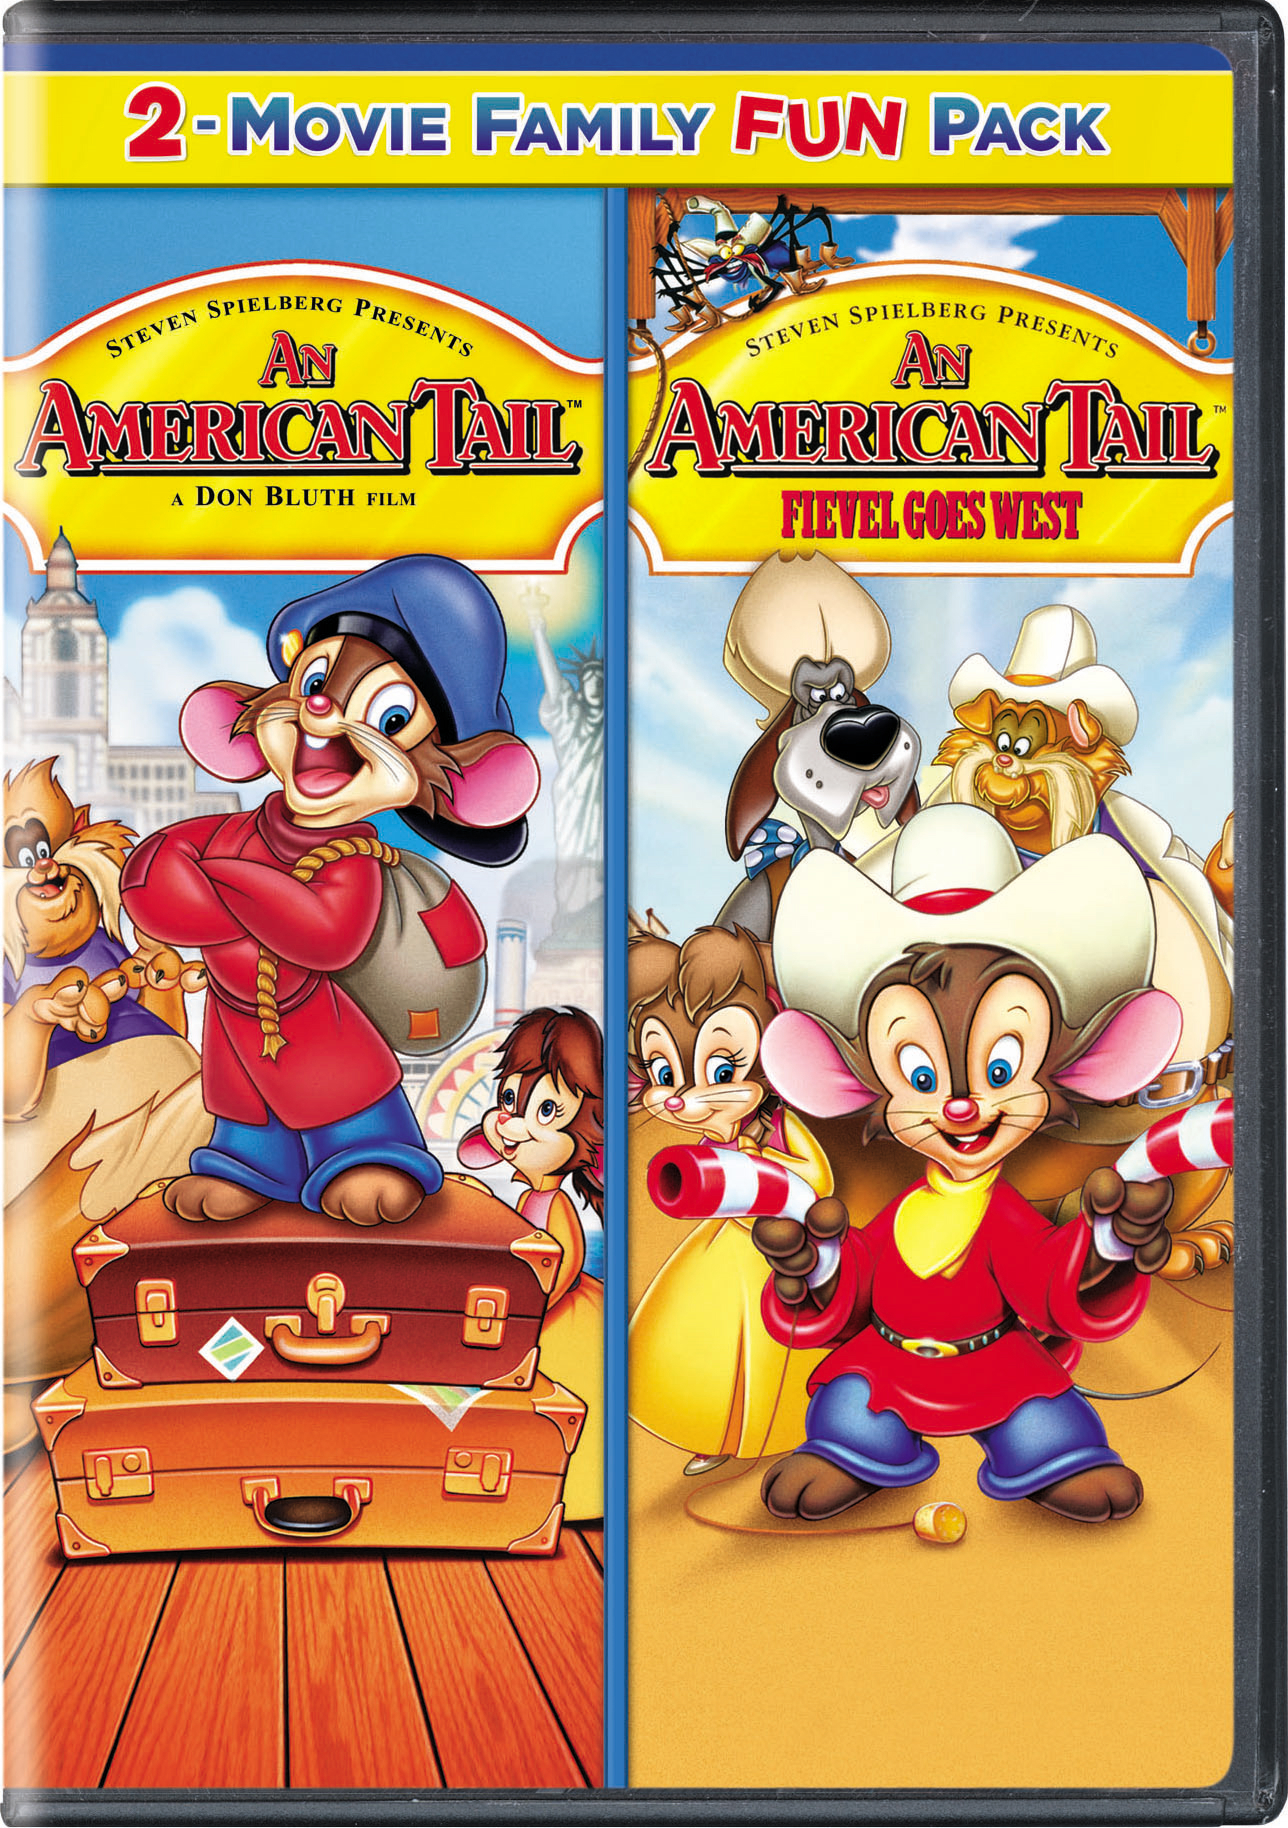 AN AMERICAN TAIL